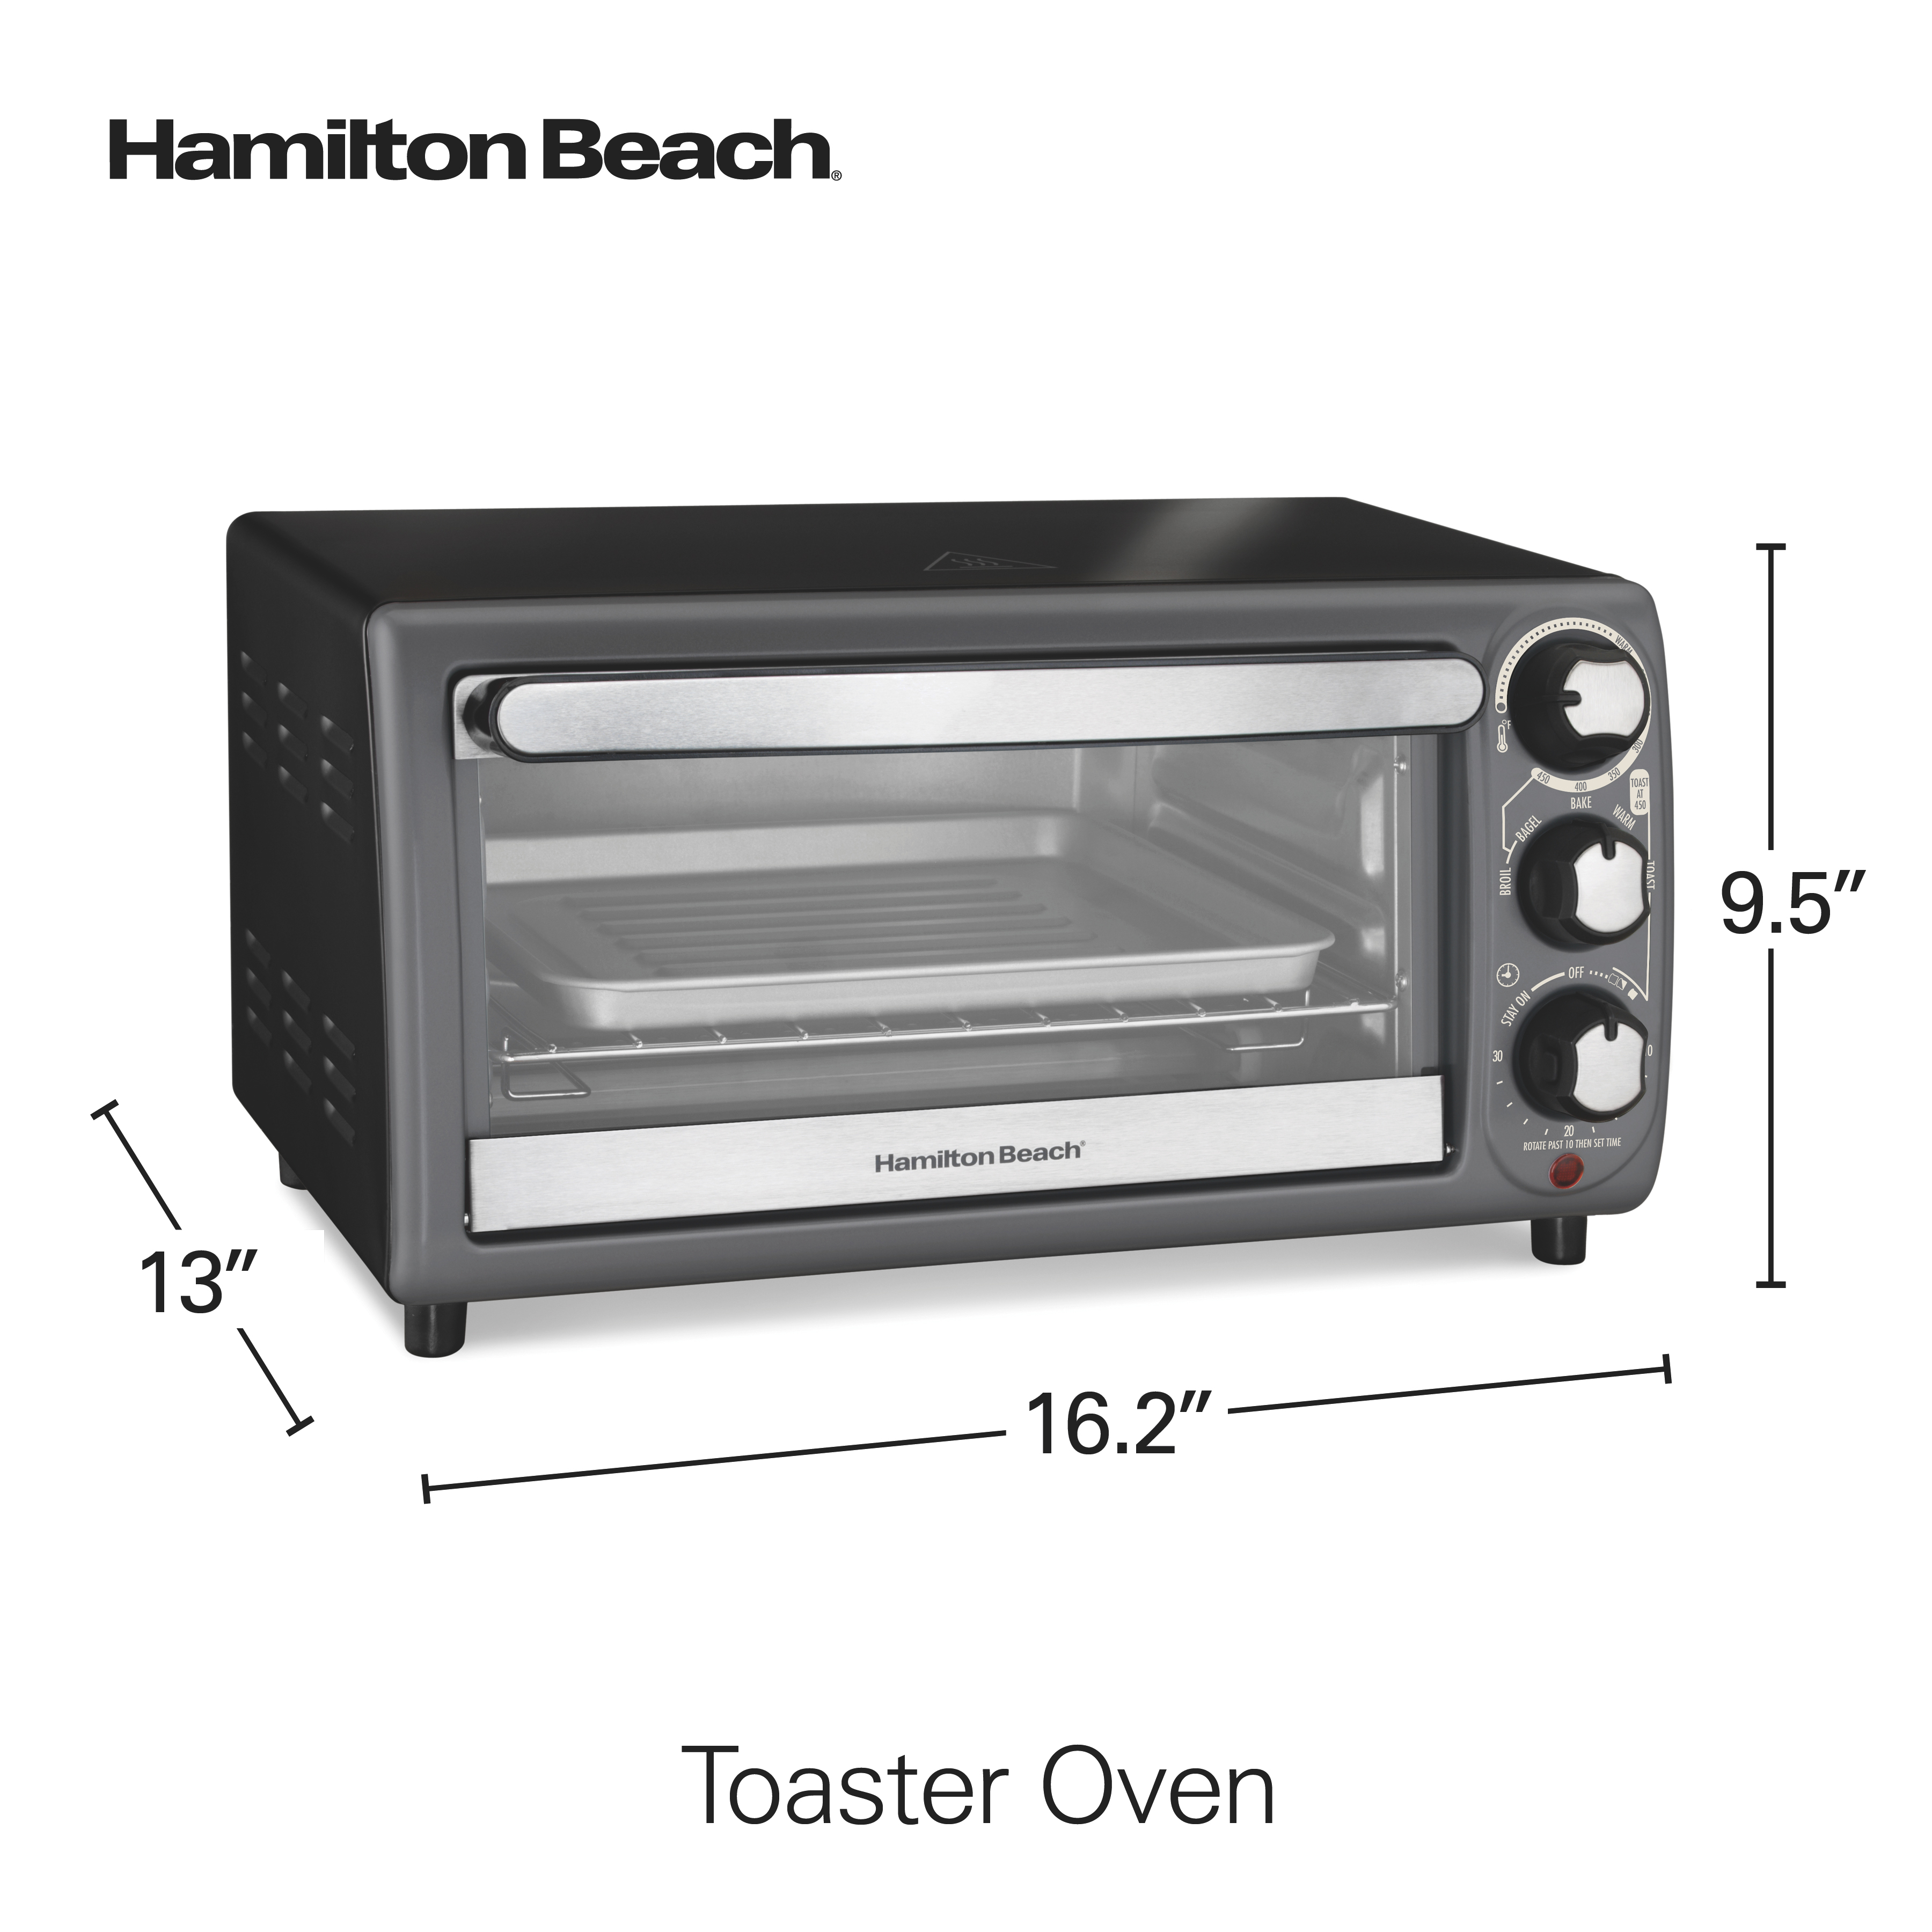 Hamilton Beach Toaster Oven, Black with Gray Accents, 31148 - image 4 of 8